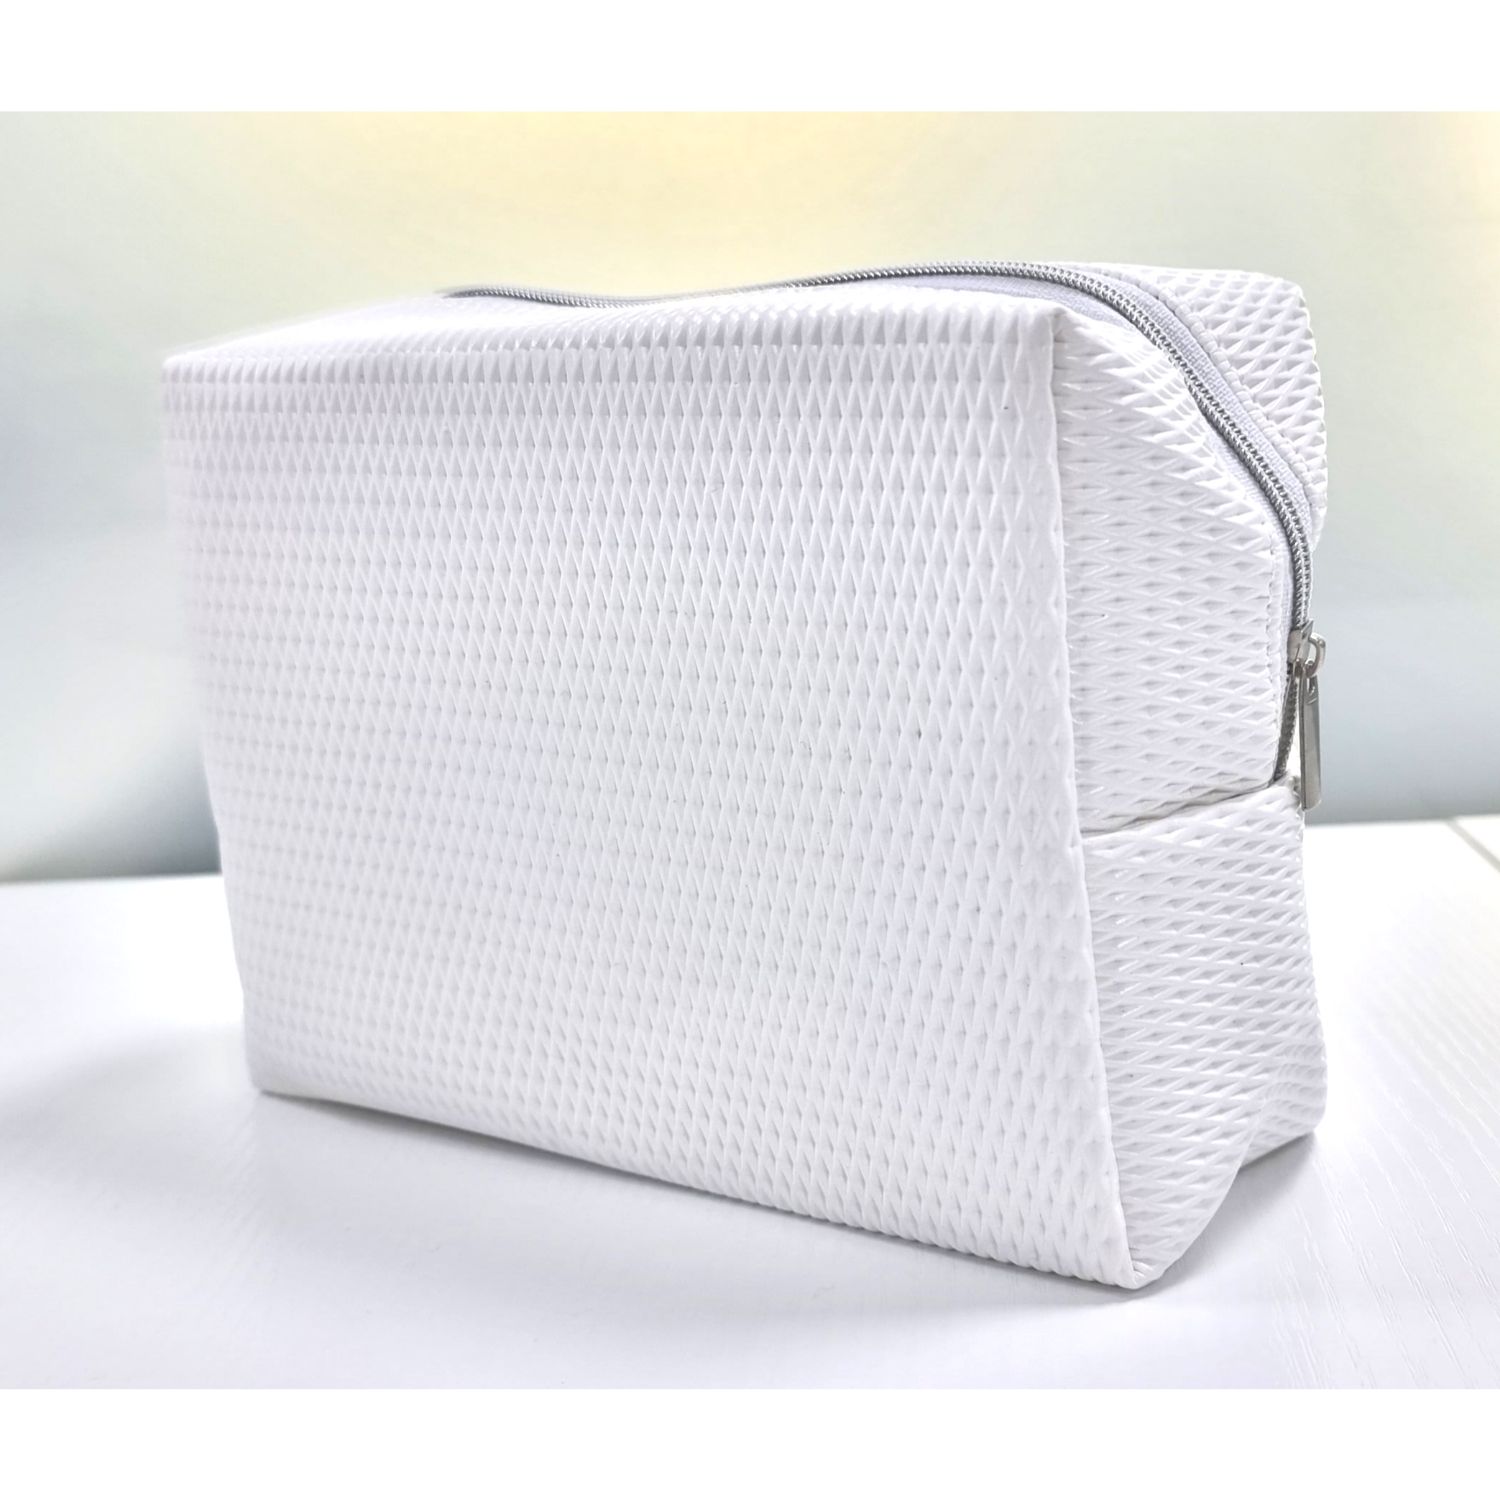 Product Image for Eucerin White Pouch